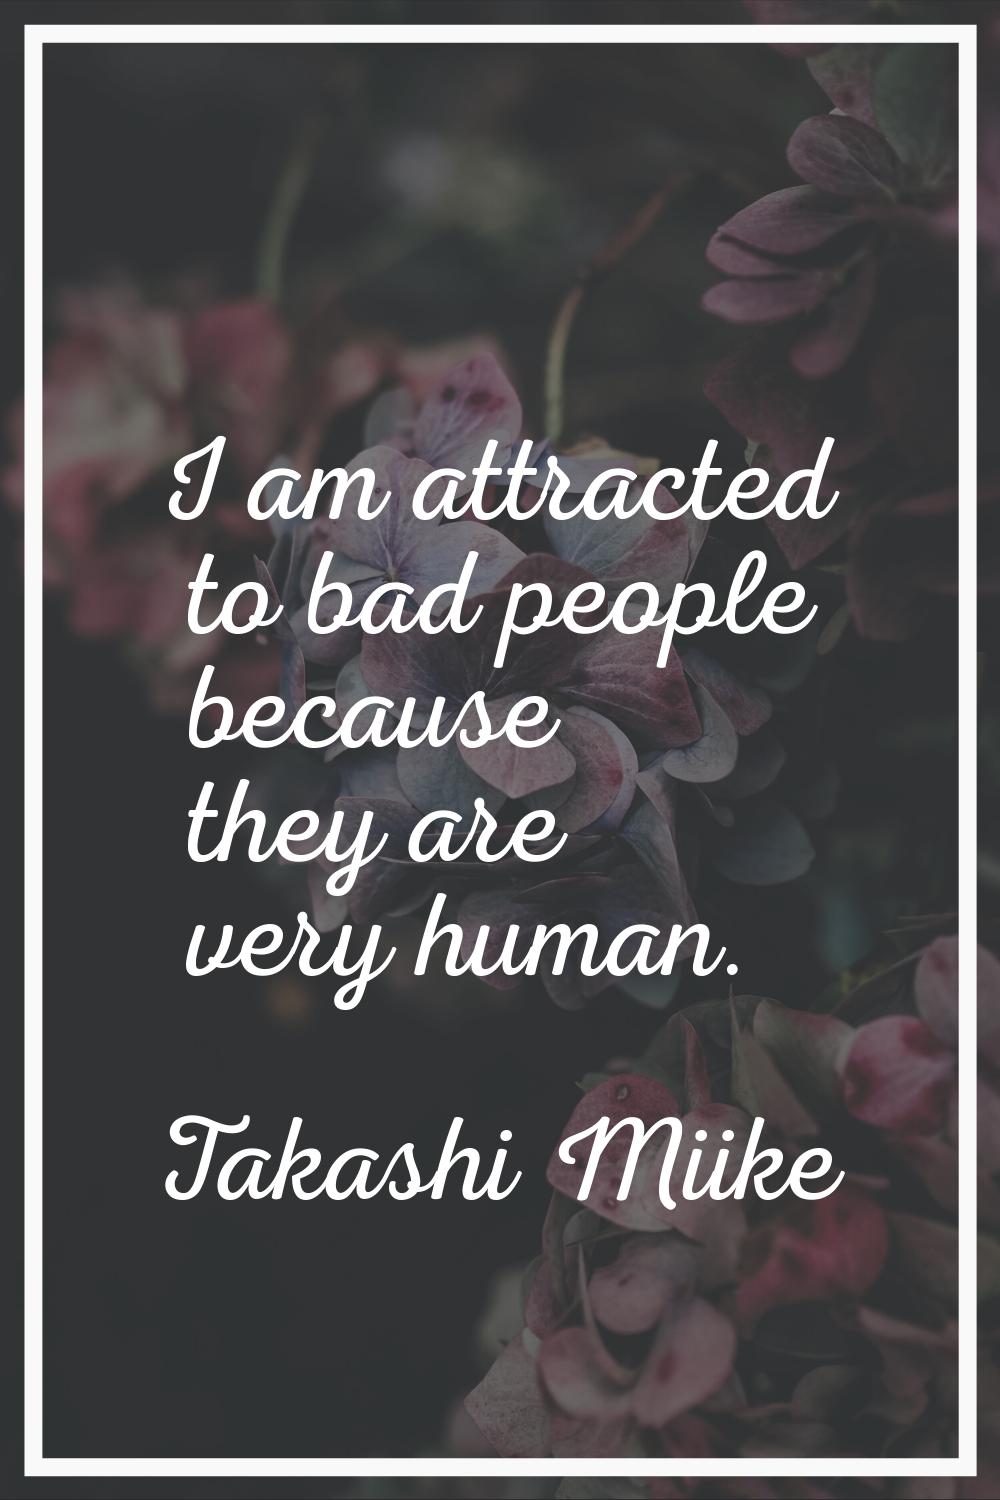 I am attracted to bad people because they are very human.